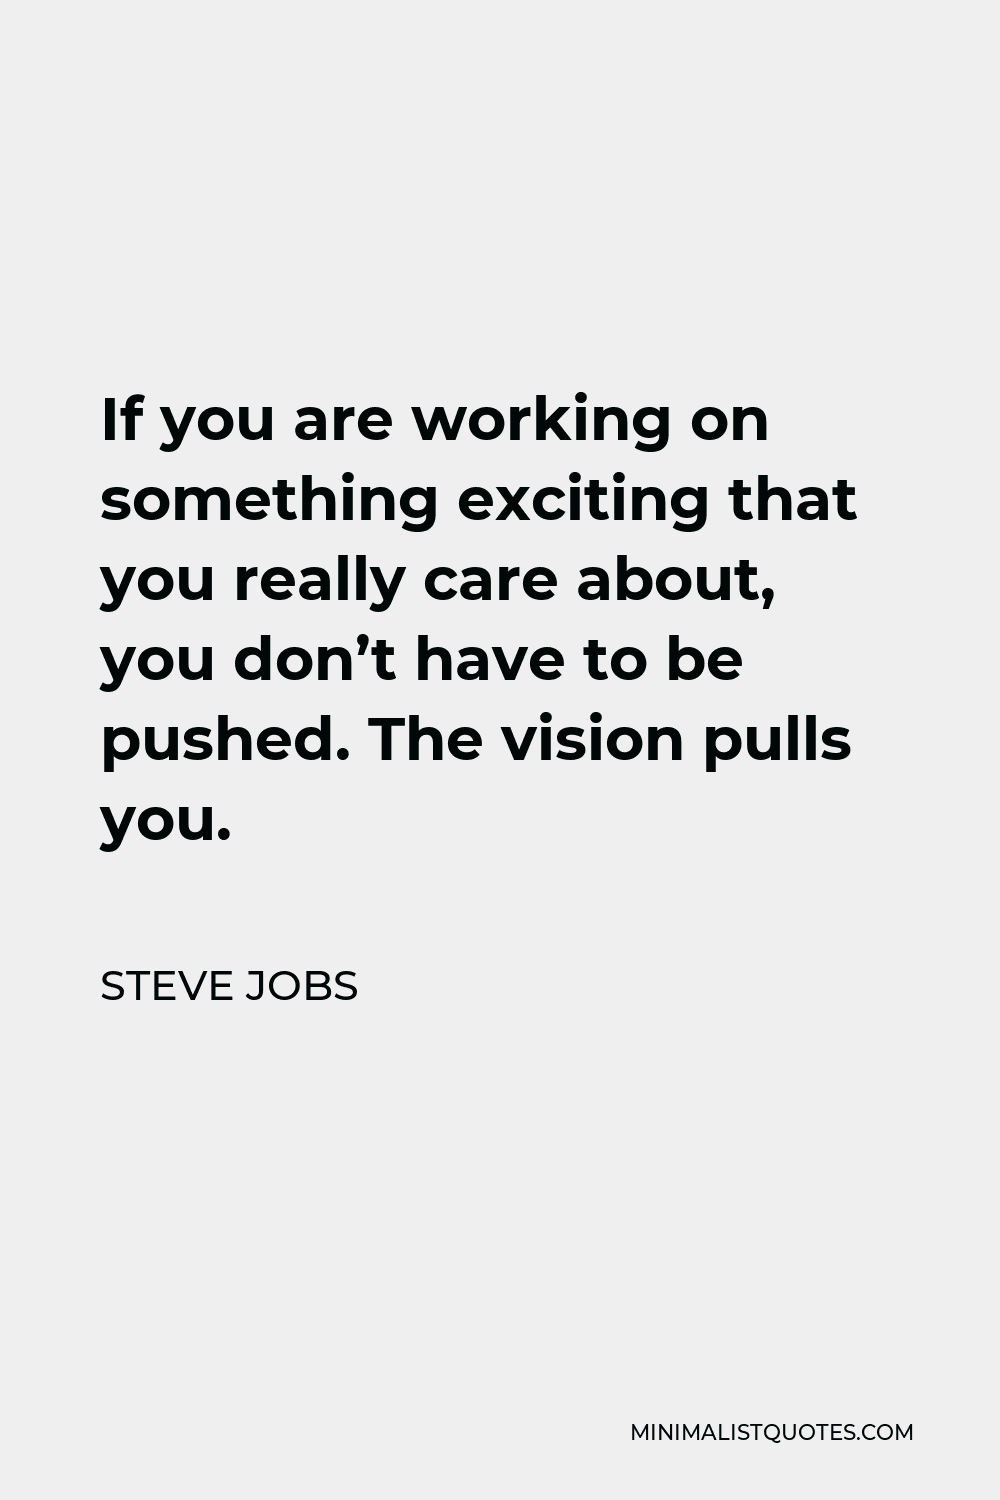 Steve Jobs Quote - If you are working on something exciting that you really care about, you don’t have to be pushed. The vision pulls you.